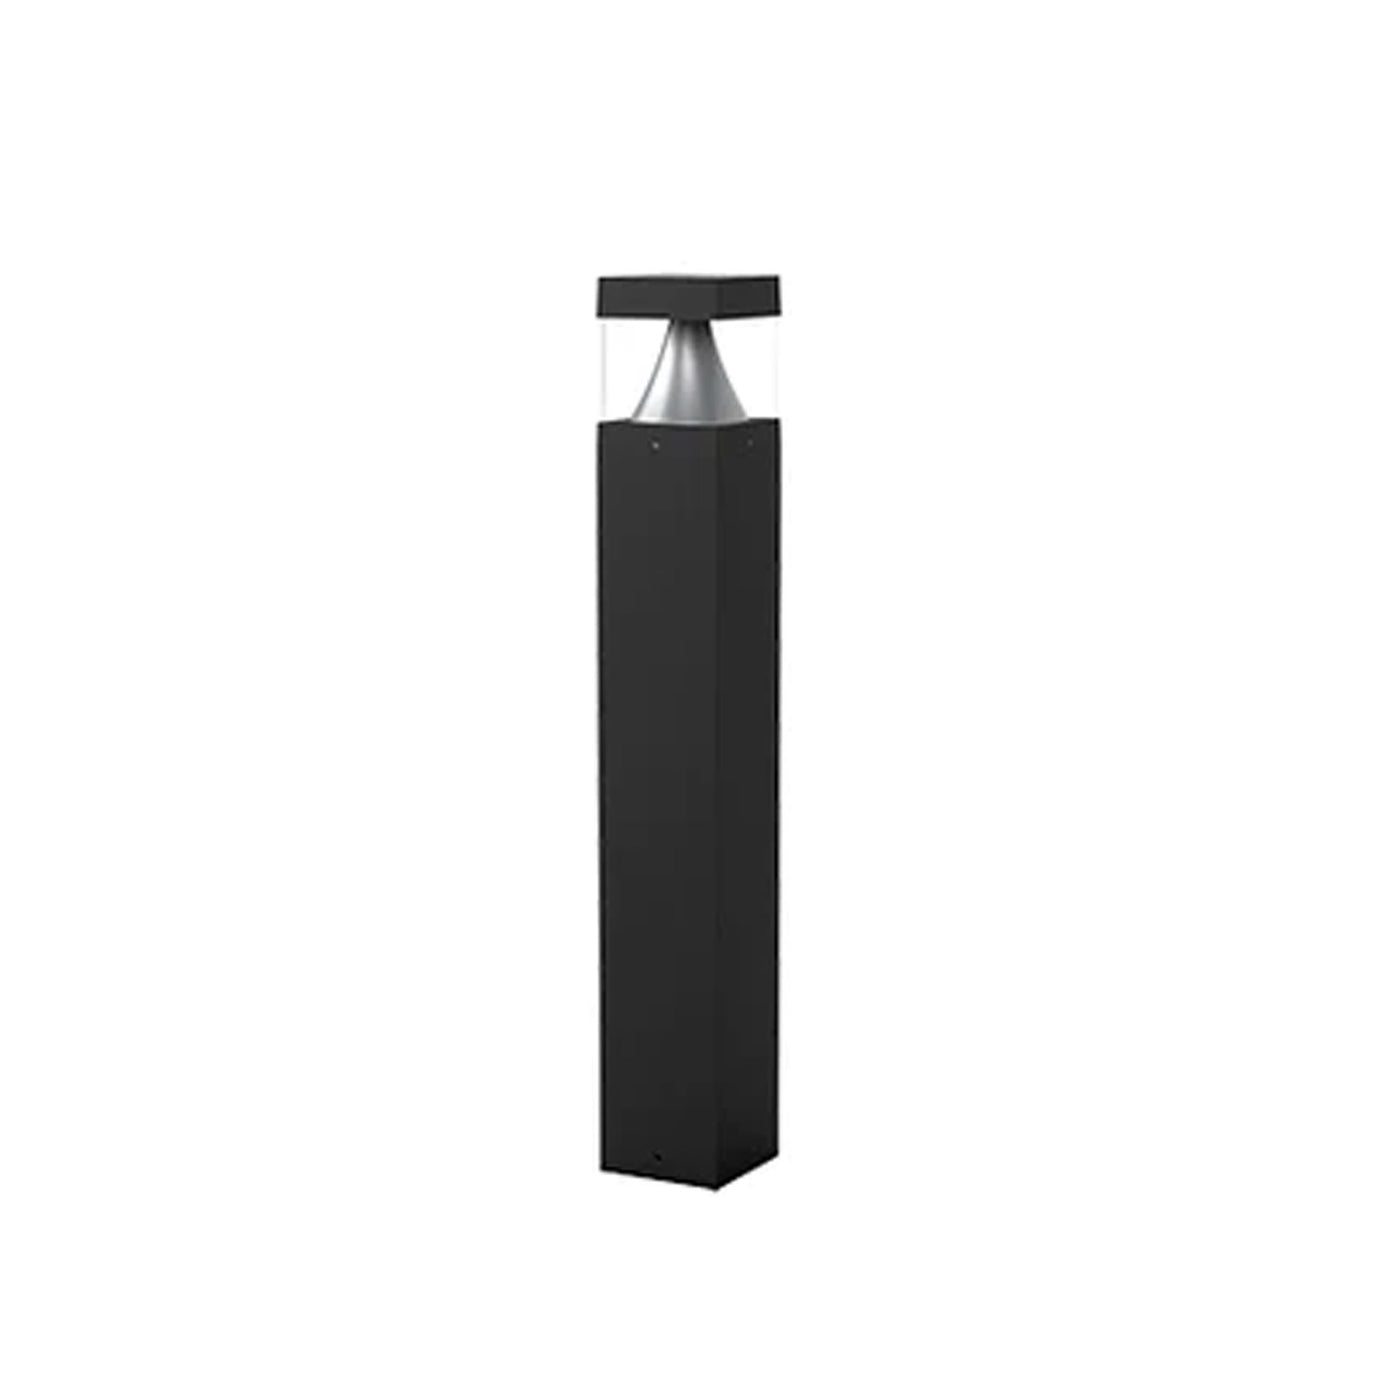 LED 42" Flat Top Square Bollard, 1496 Lumens, Wattage and CCT Selectable, 120-277V, Cone Reflector, Clear Lense, Black or Brown Finish